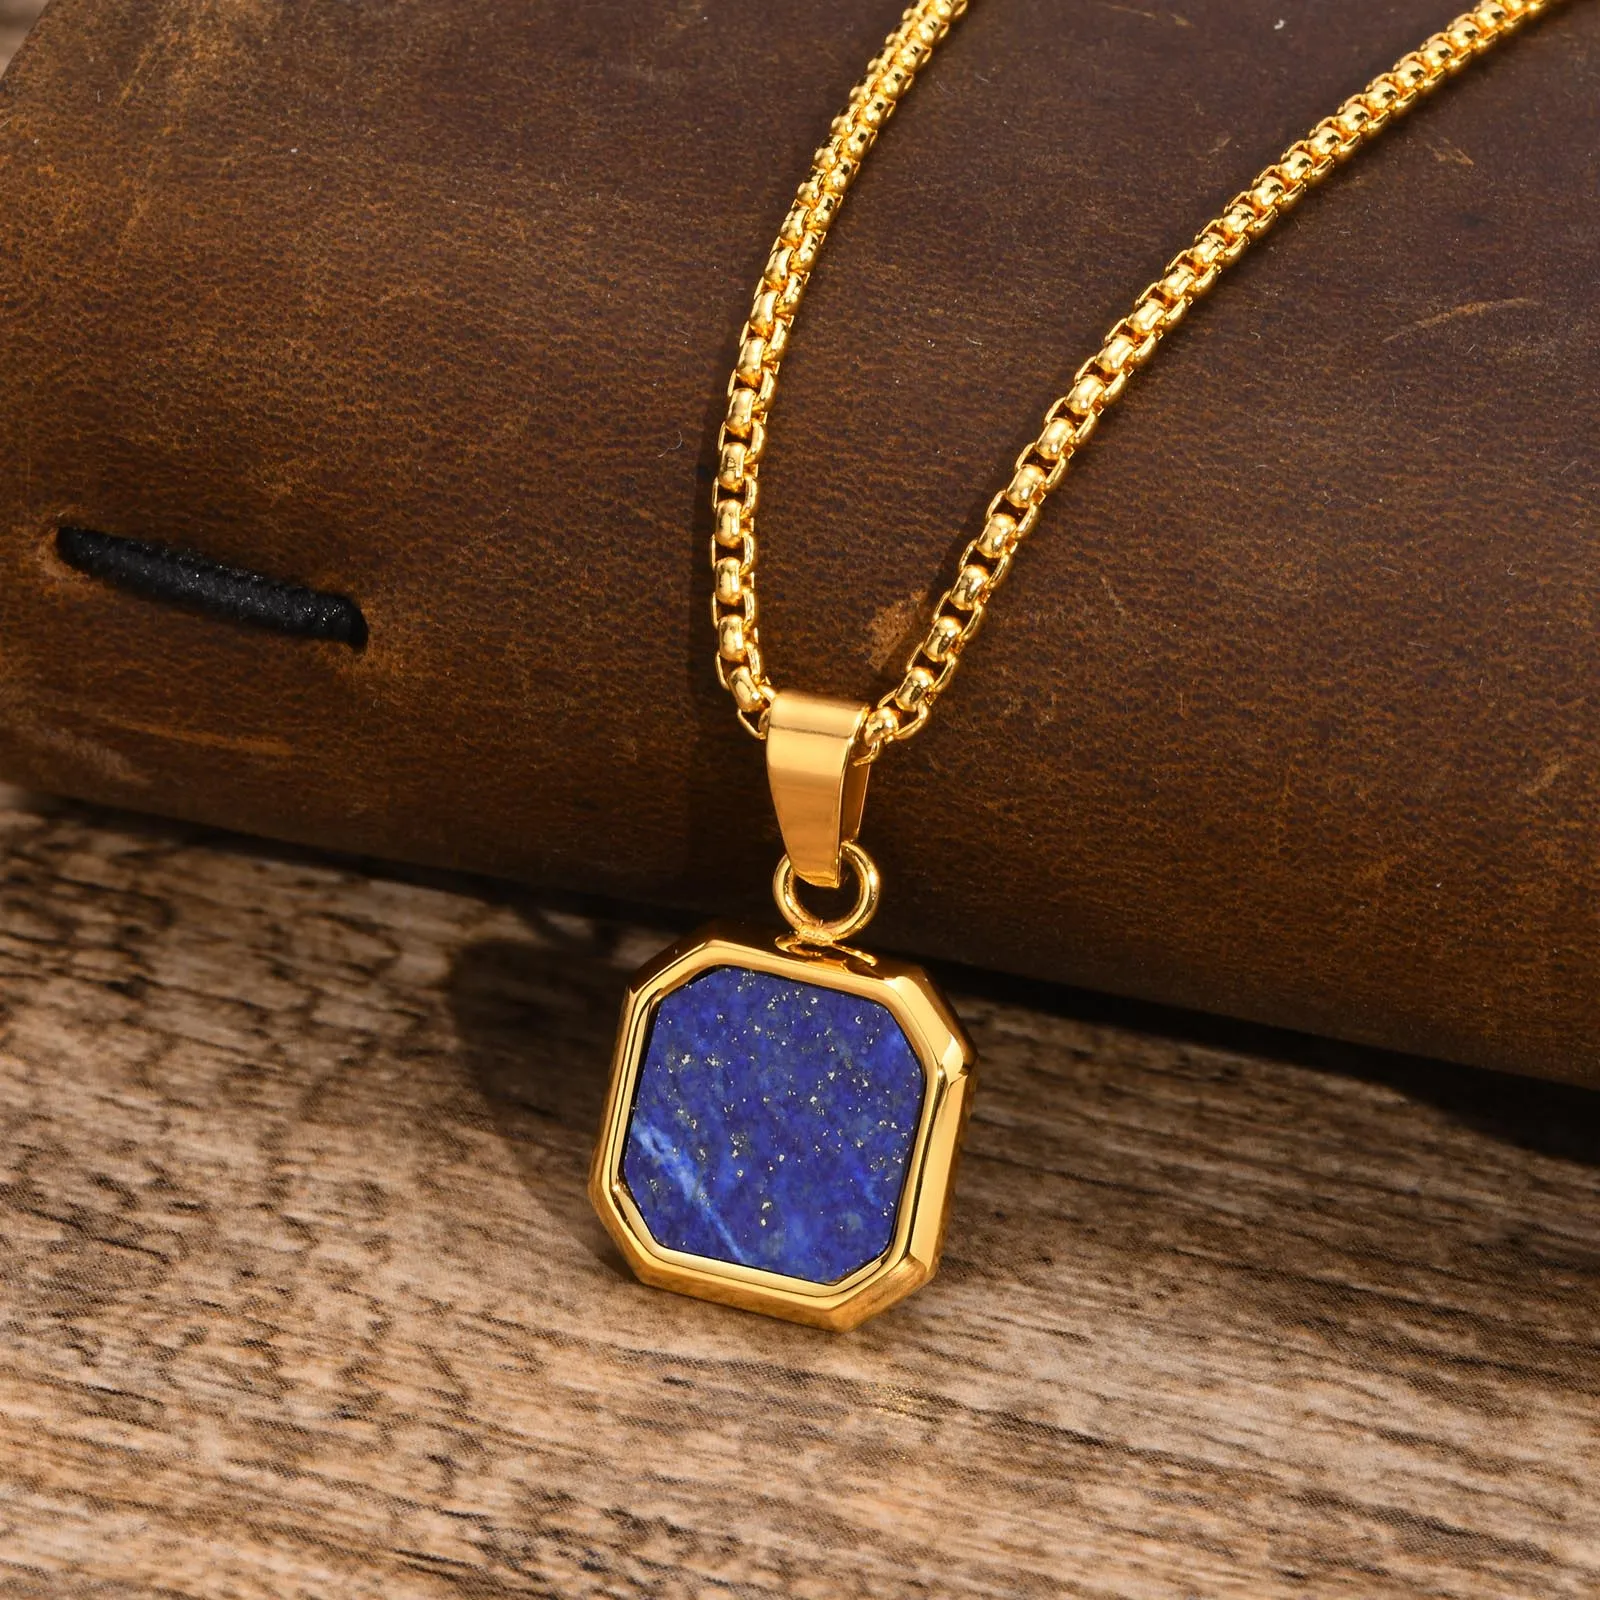 

Men's Stylish Gold Color Square Necklace with Lapis Lazuli Stone Pendant,Waterproof Stainless Steel Geometric Male Collar